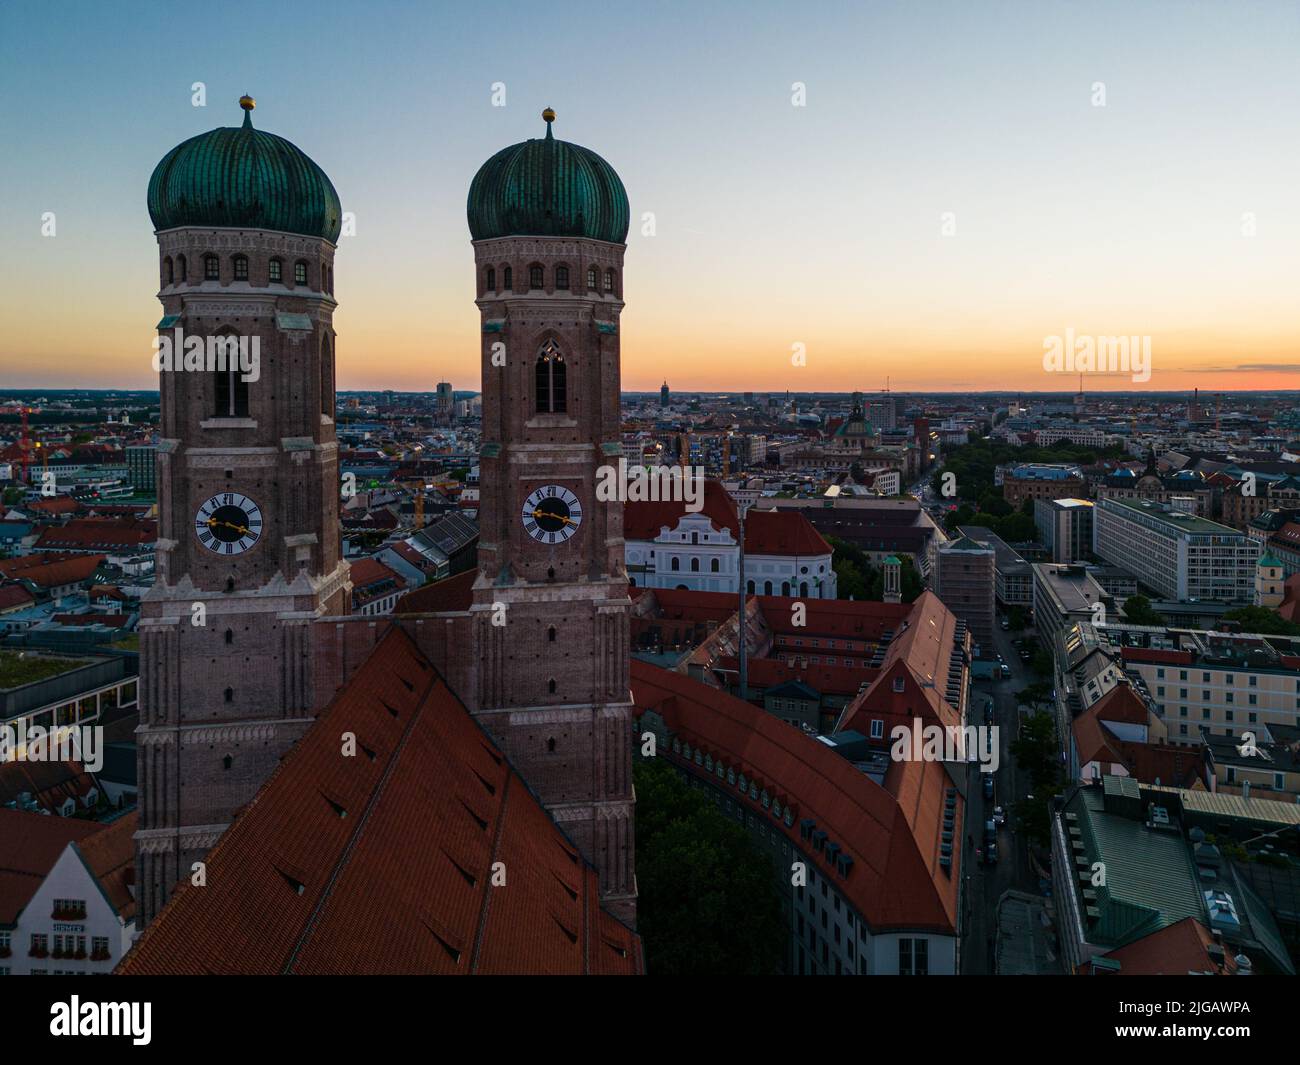 The Frauenkirche Towers With a Wonderful Evening Sky in Munich, Germany Stock Photo